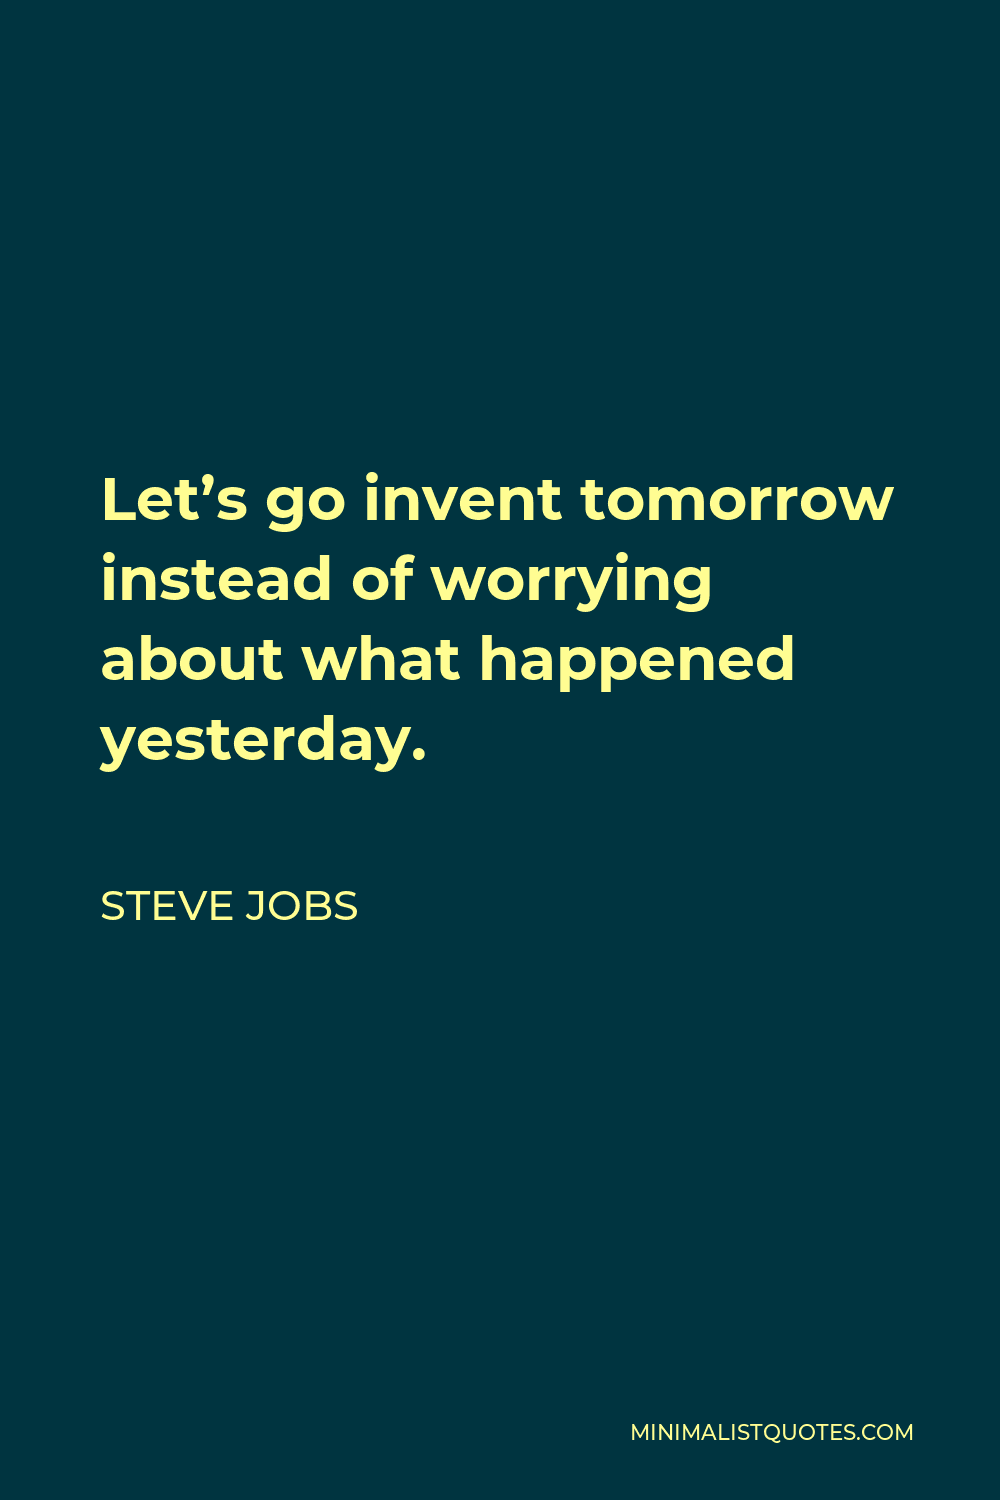 Steve Jobs Quote - Let’s go invent tomorrow instead of worrying about what happened yesterday.